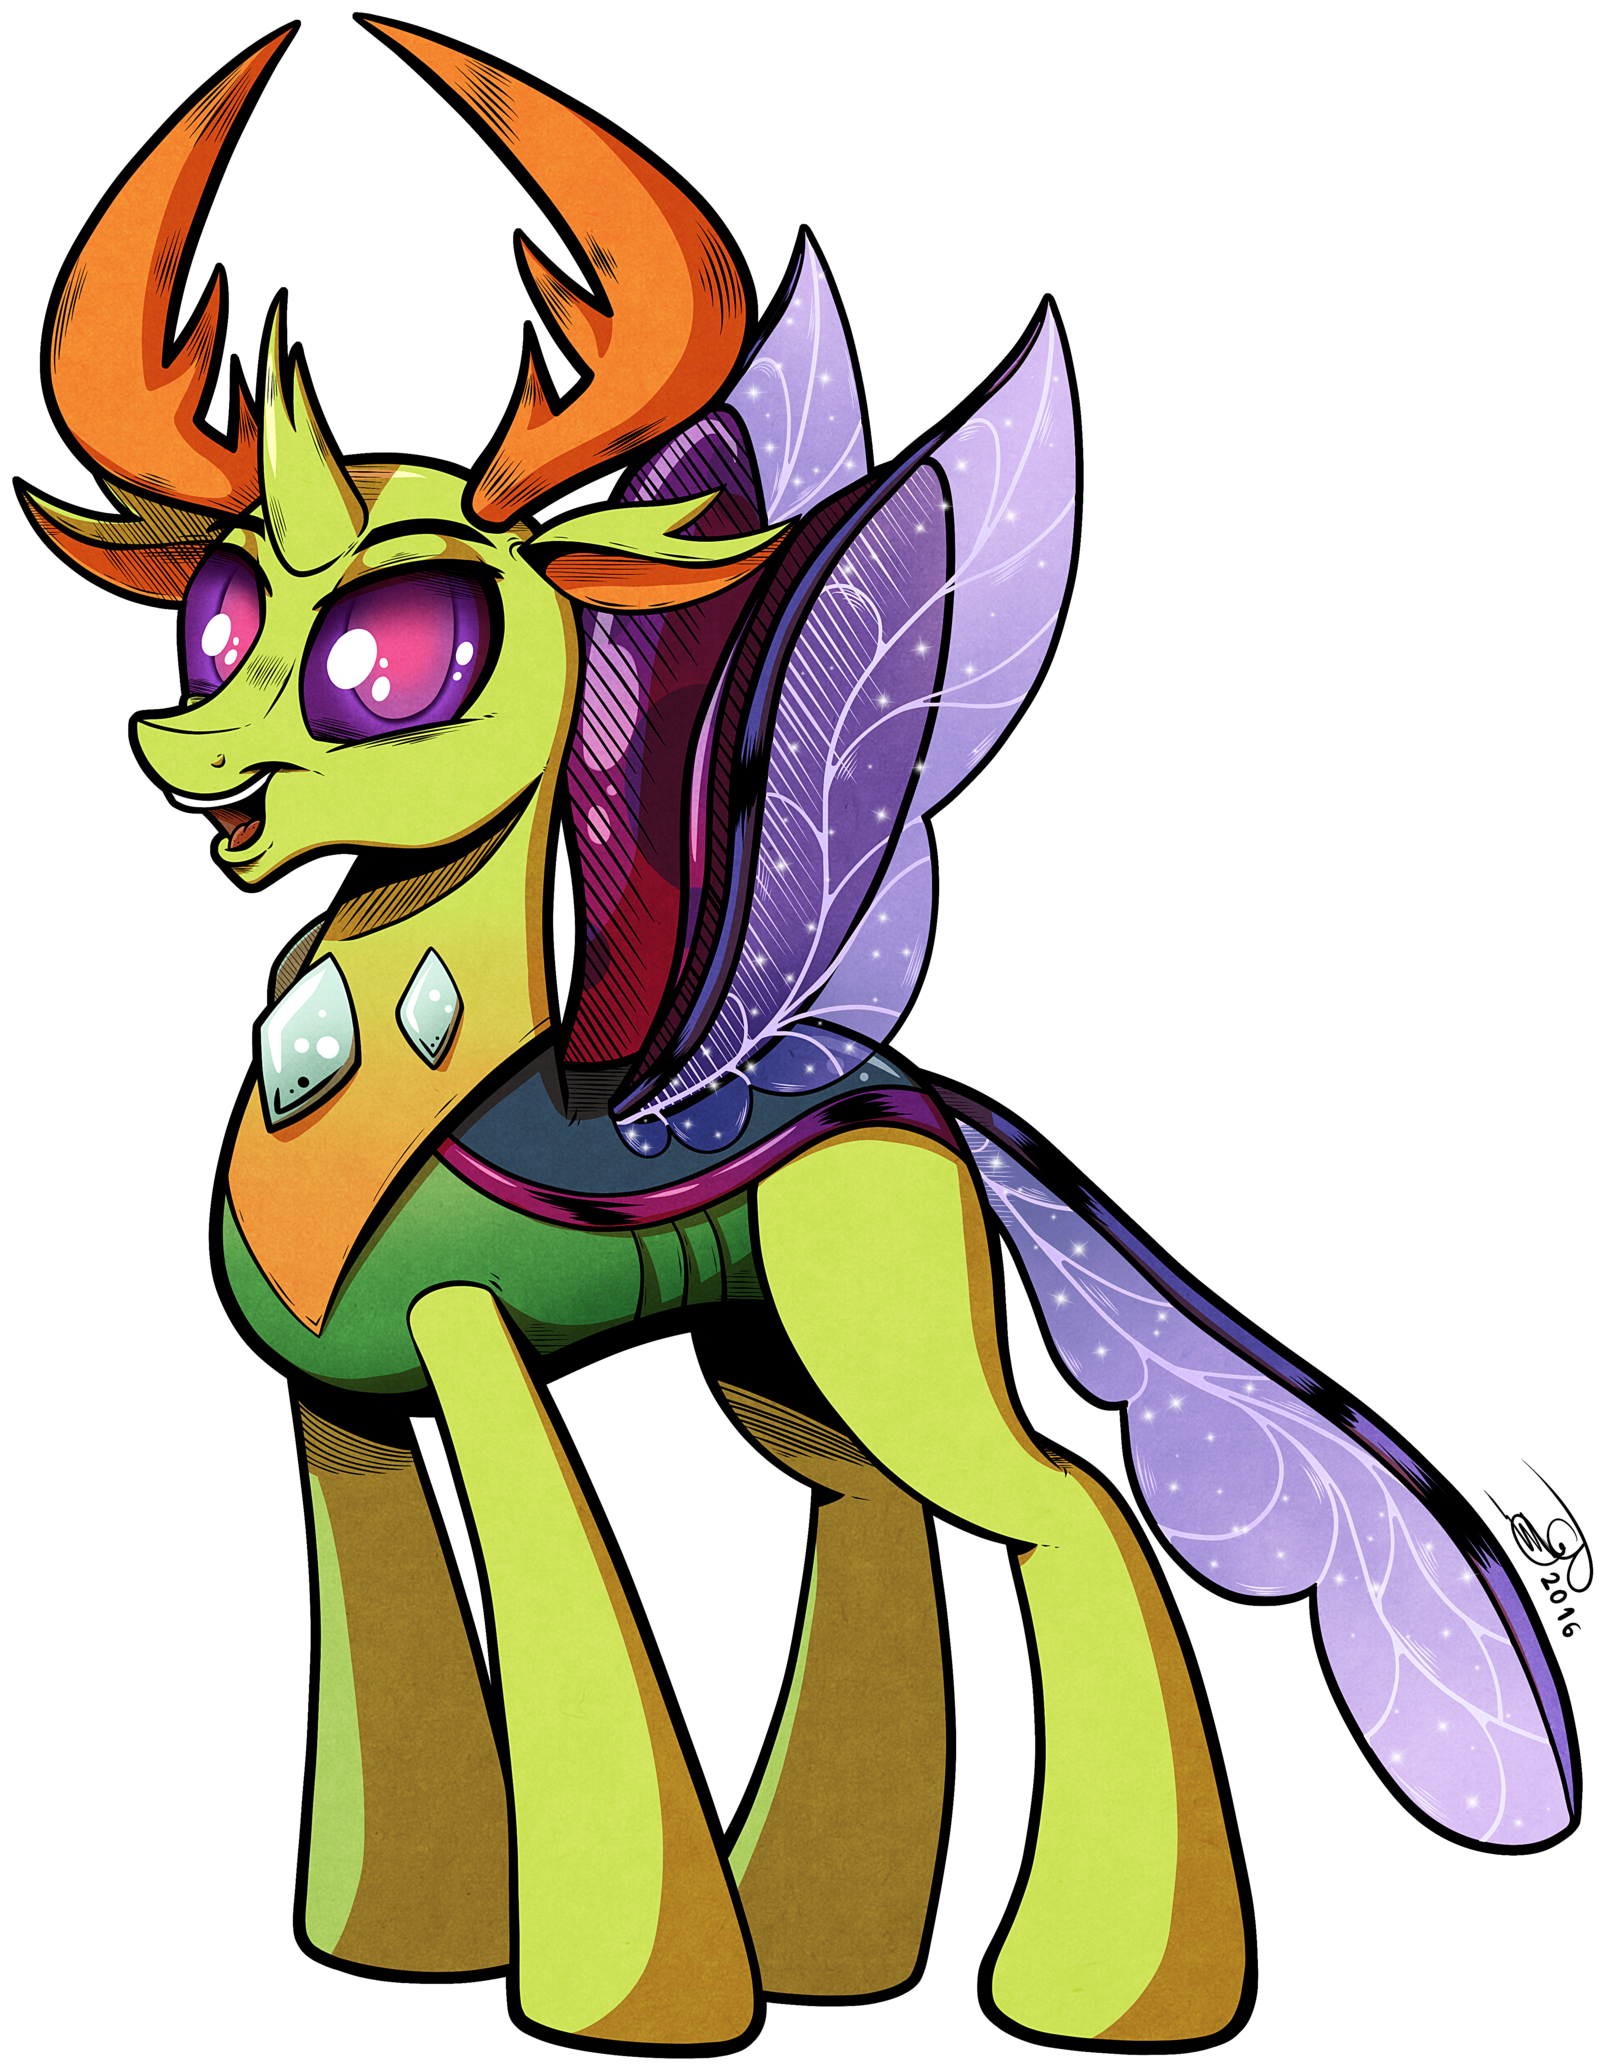 king_thorax_by_gray__day-dakfh77.png